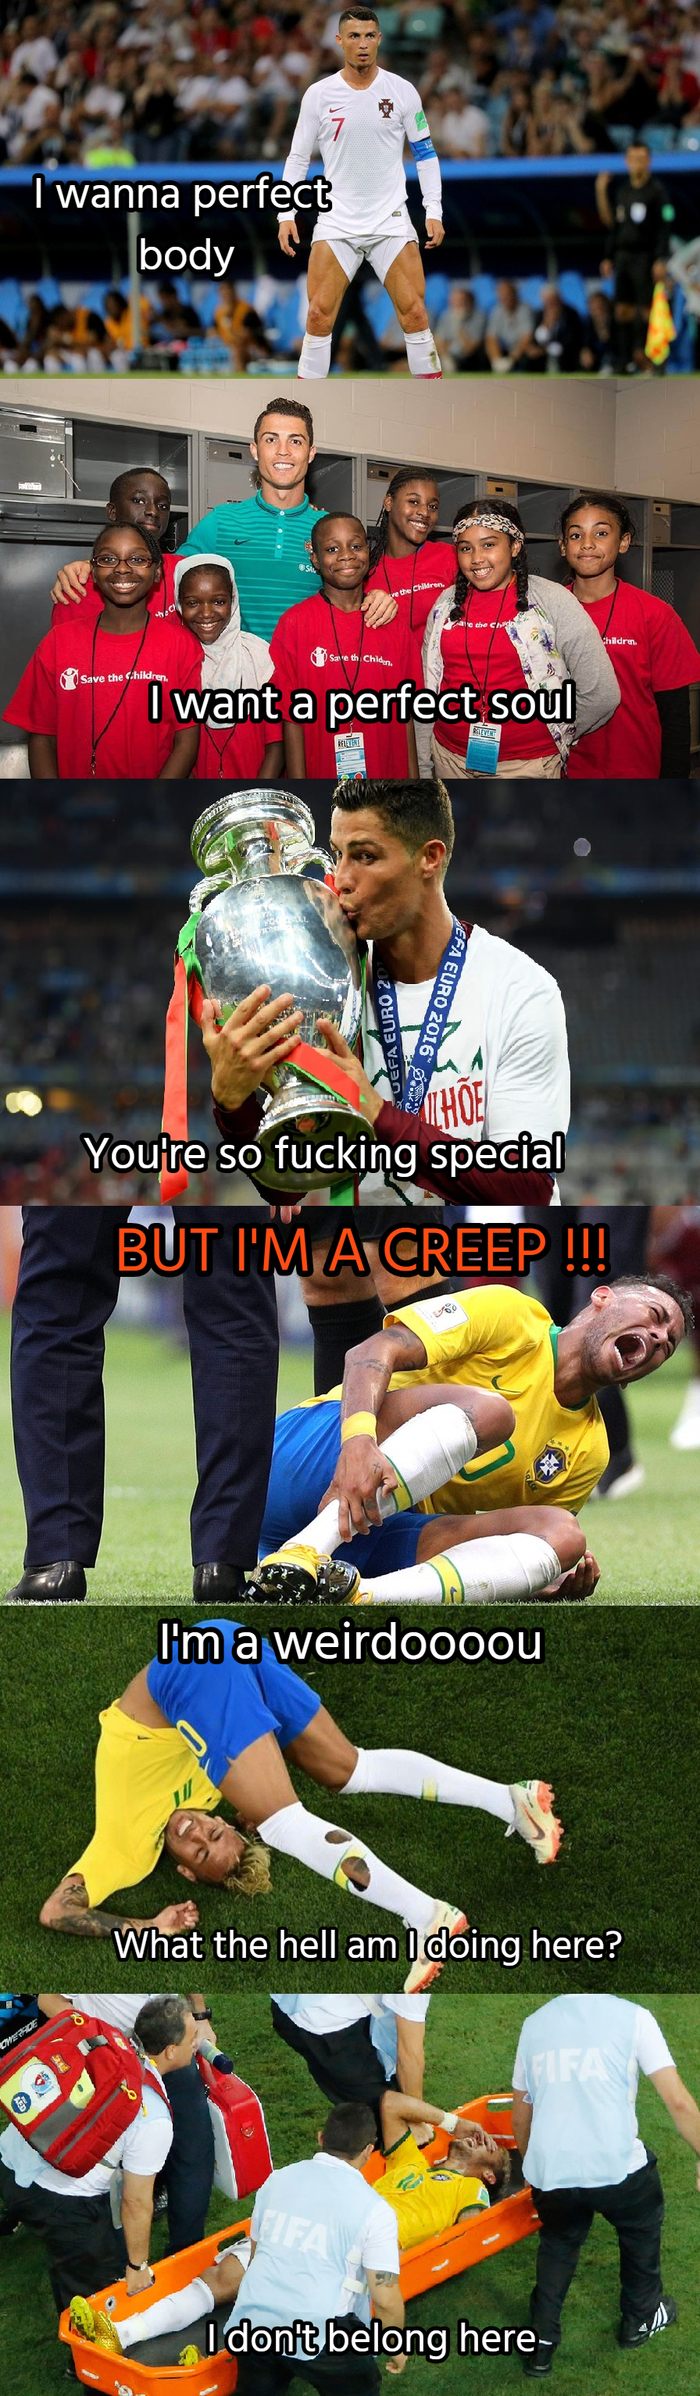 Just wants to be special - Radiohead, Longpost, Football, Neymar Junior, Cristiano Ronaldo, Picture with text, 2018 FIFA World Cup